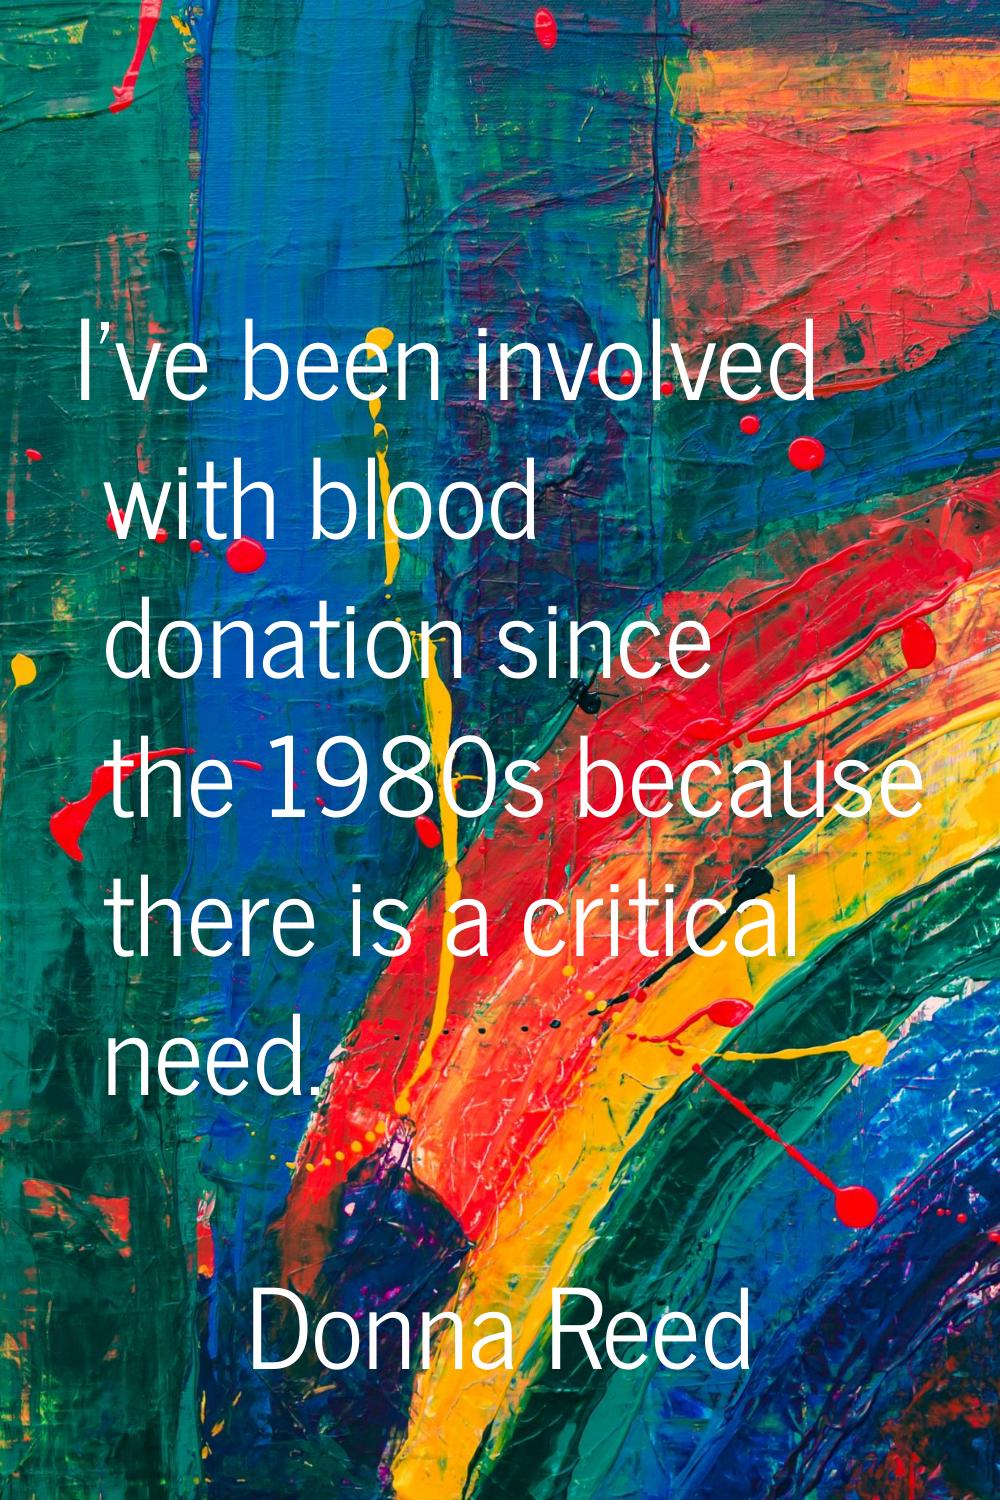 I've been involved with blood donation since the 1980s because there is a critical need.